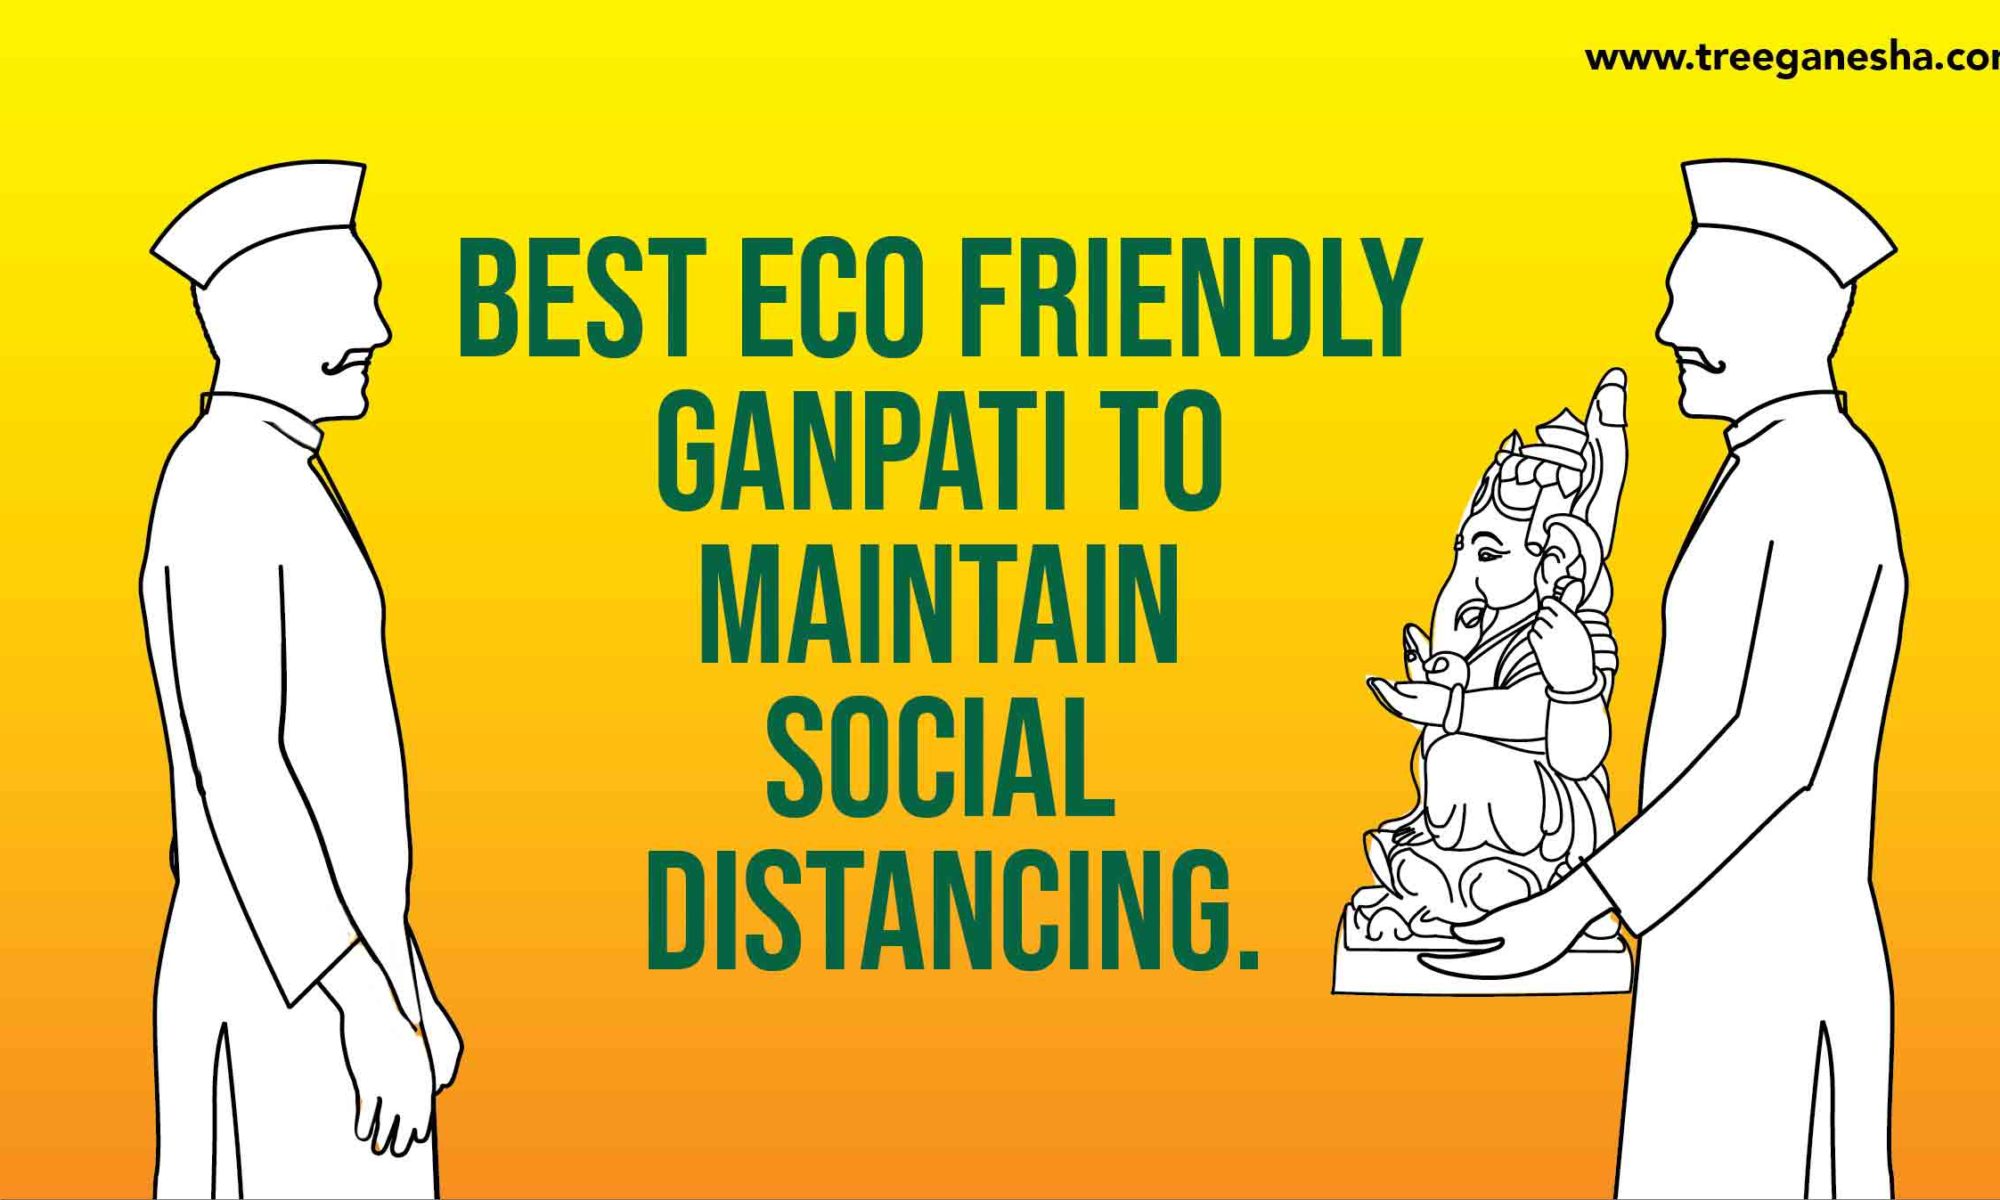 BEST ECO FRIENDLY GANPATI TO MAINTAIN SOCIAL DISTANCING.